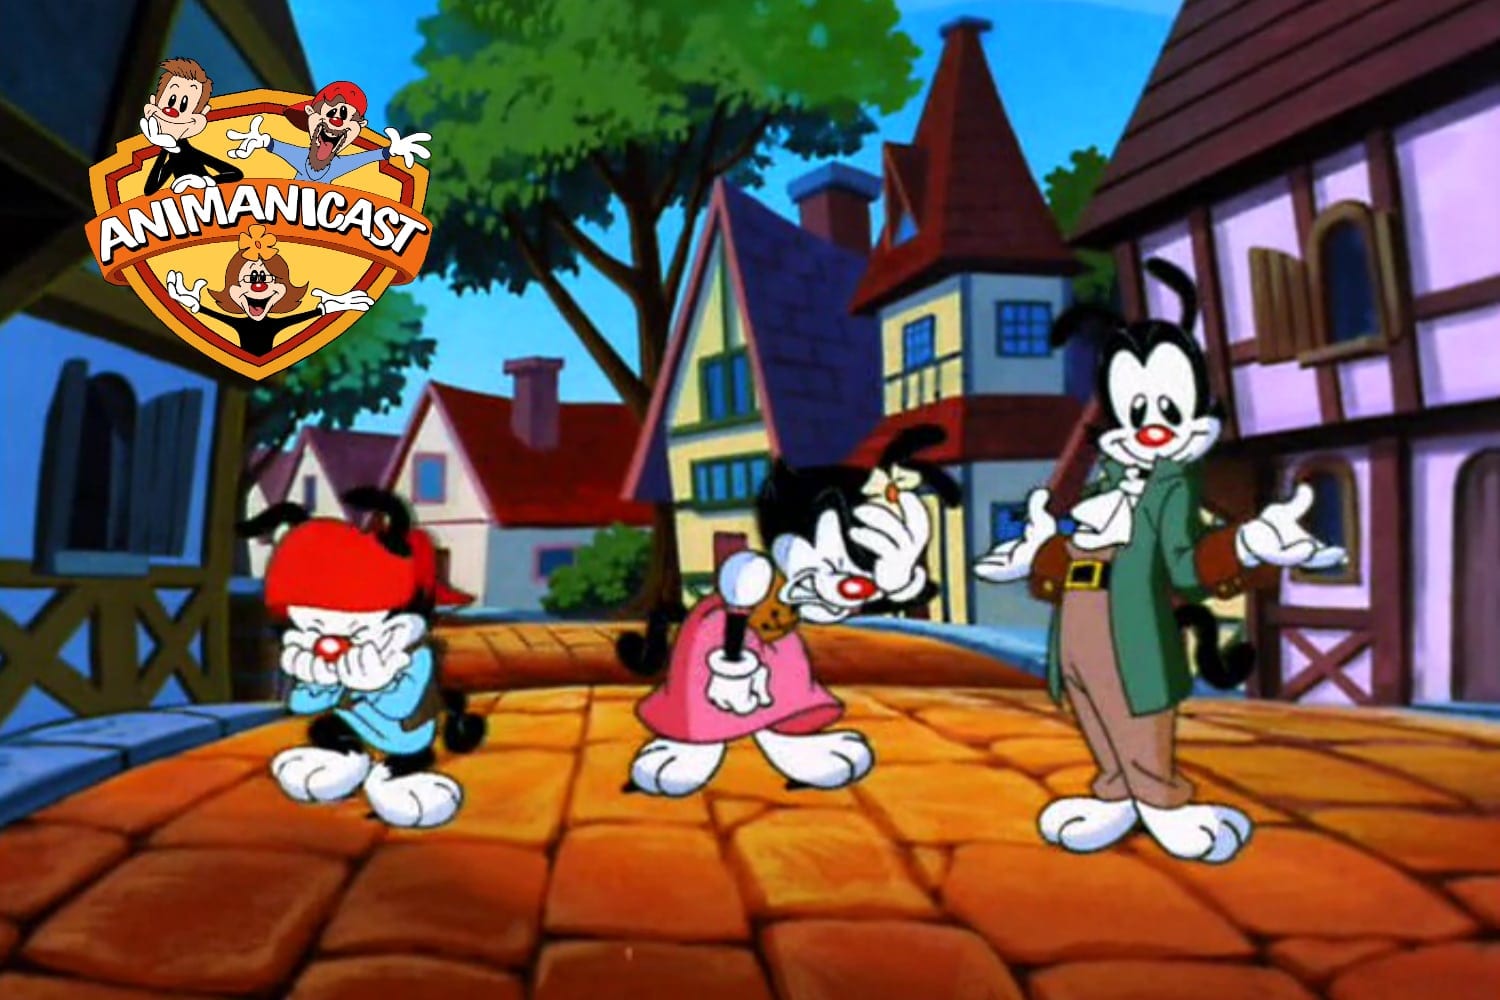 Discussing "Cutie and the Beast" and more from Animaniacs Episode...